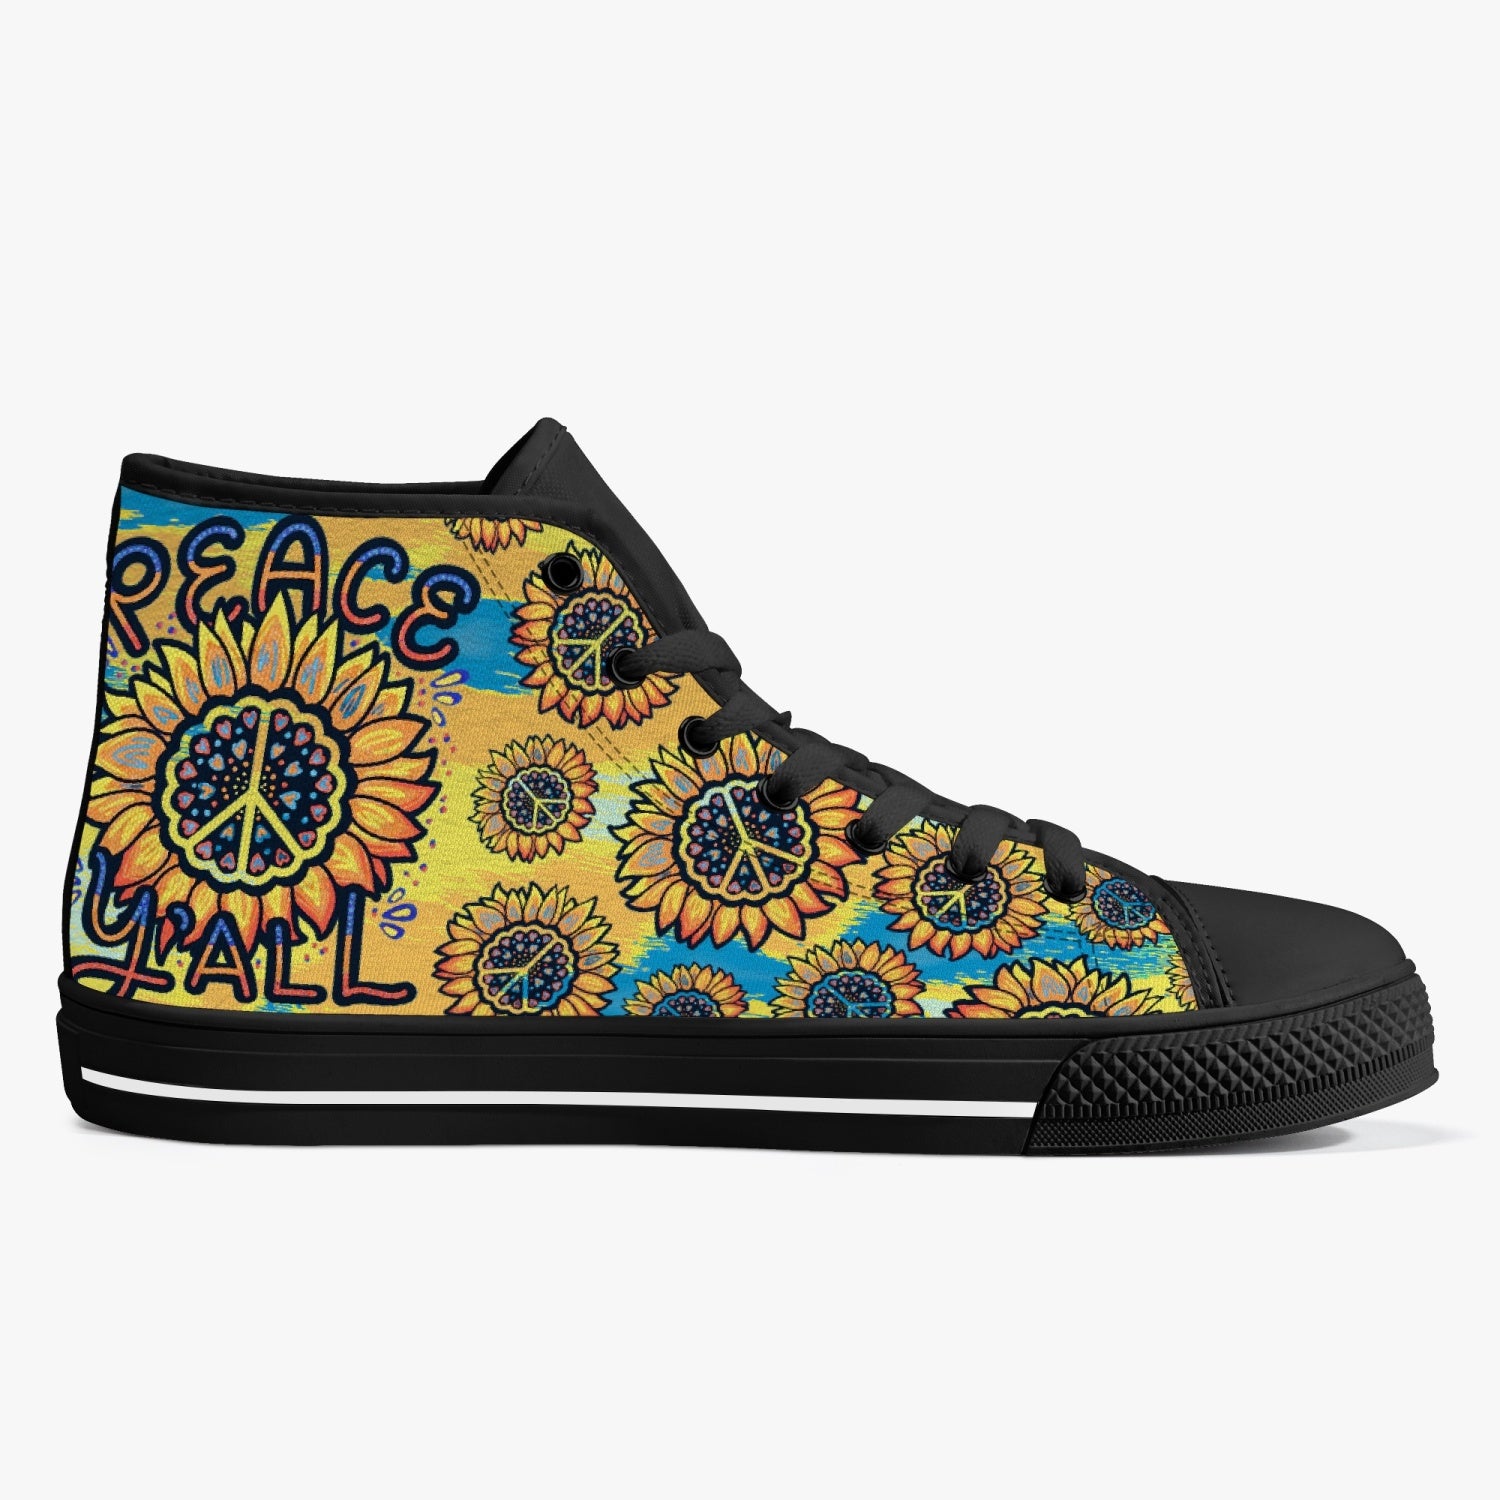 PEACE Y'ALL TIE DYE HIGH TOP CANVAS SHOES - TLTR0606234